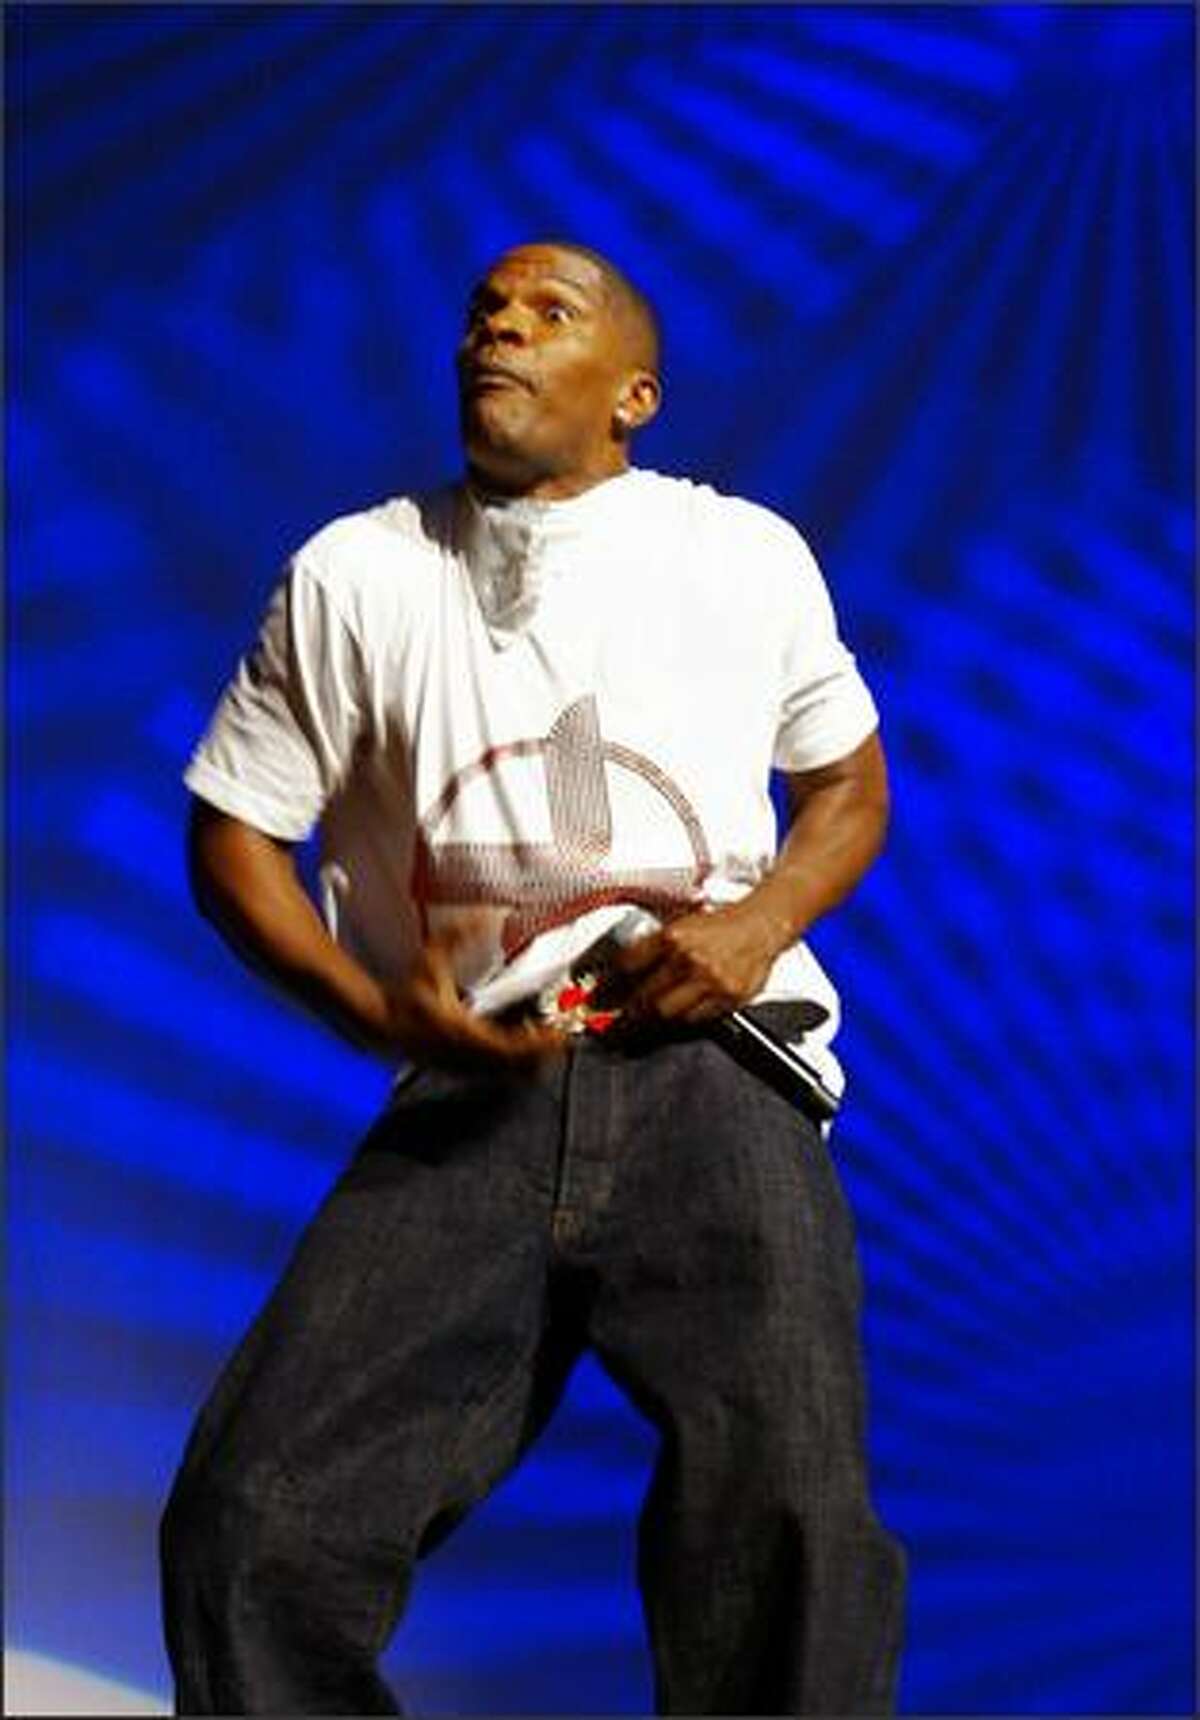 Jamie Foxx pretends he is going to take off his pants during the comedy portion of his show at KeyArena Friday.